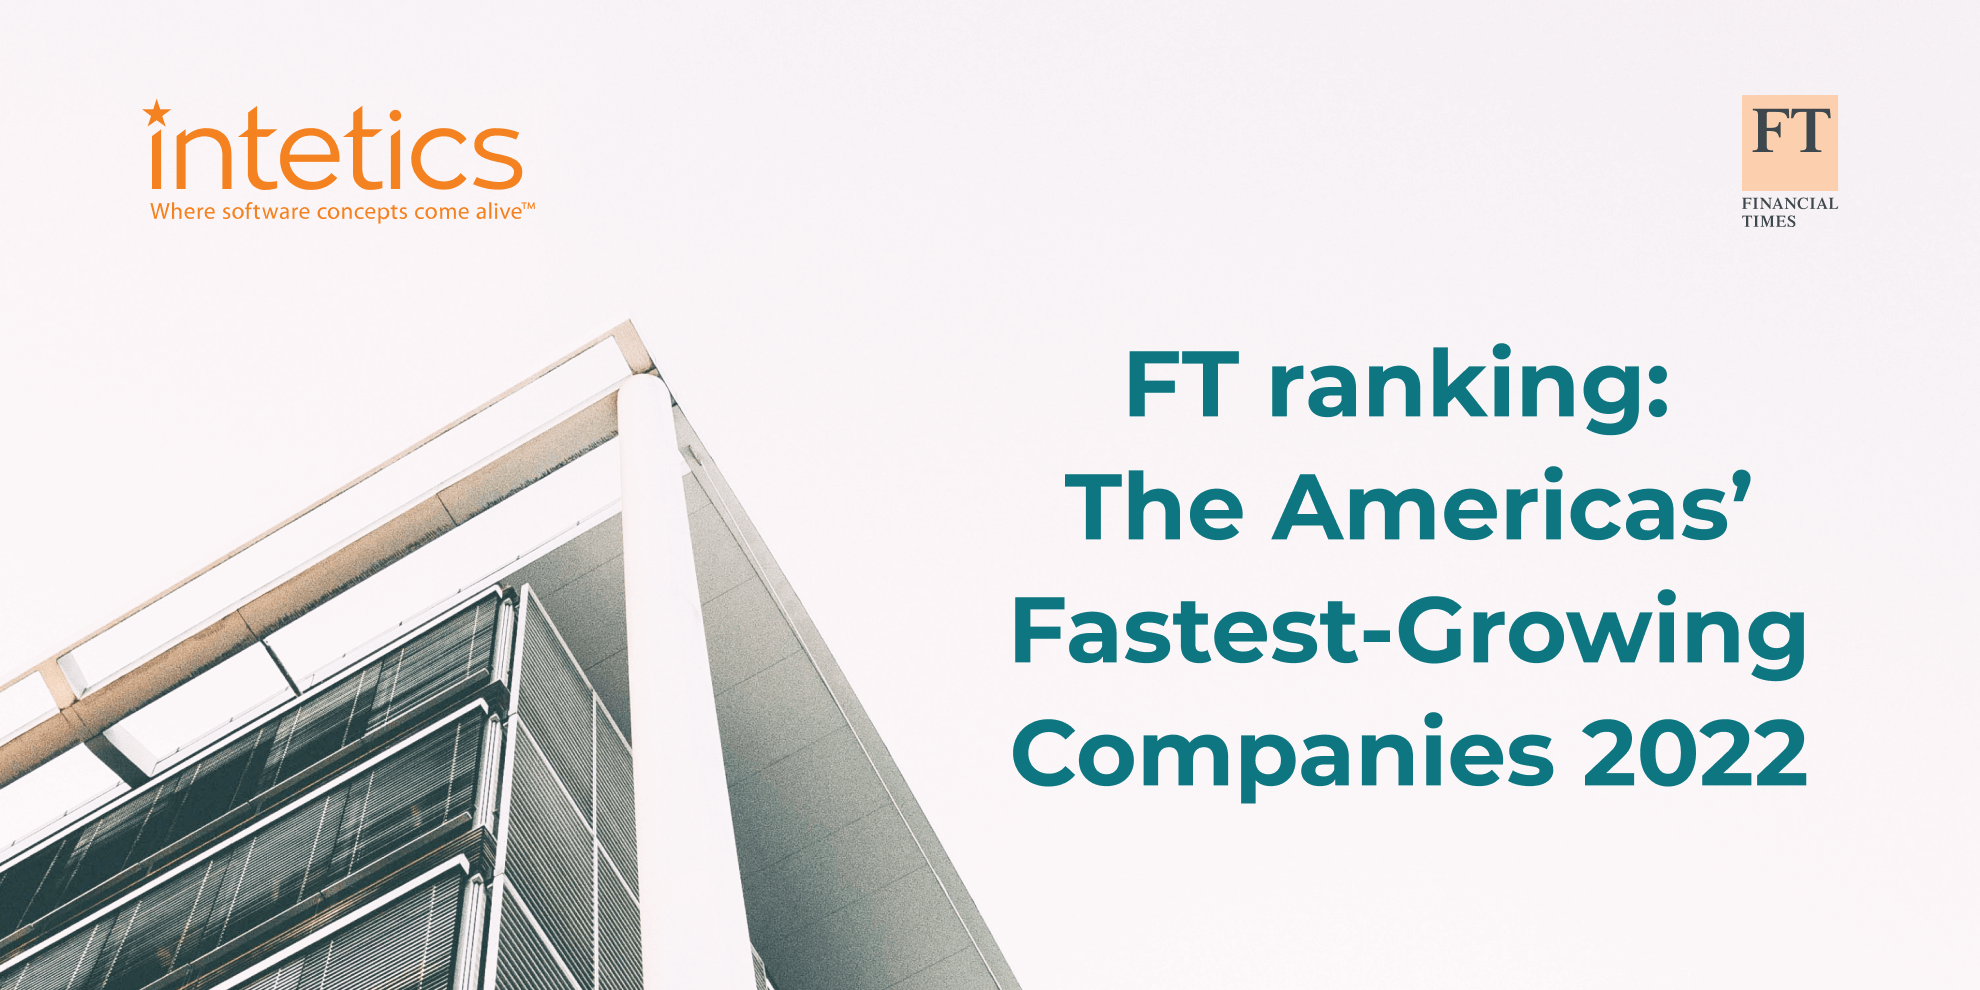 Intetics Entering The Ranking Of The Americas Fastest Growing Companies 2022 By Financial Times 